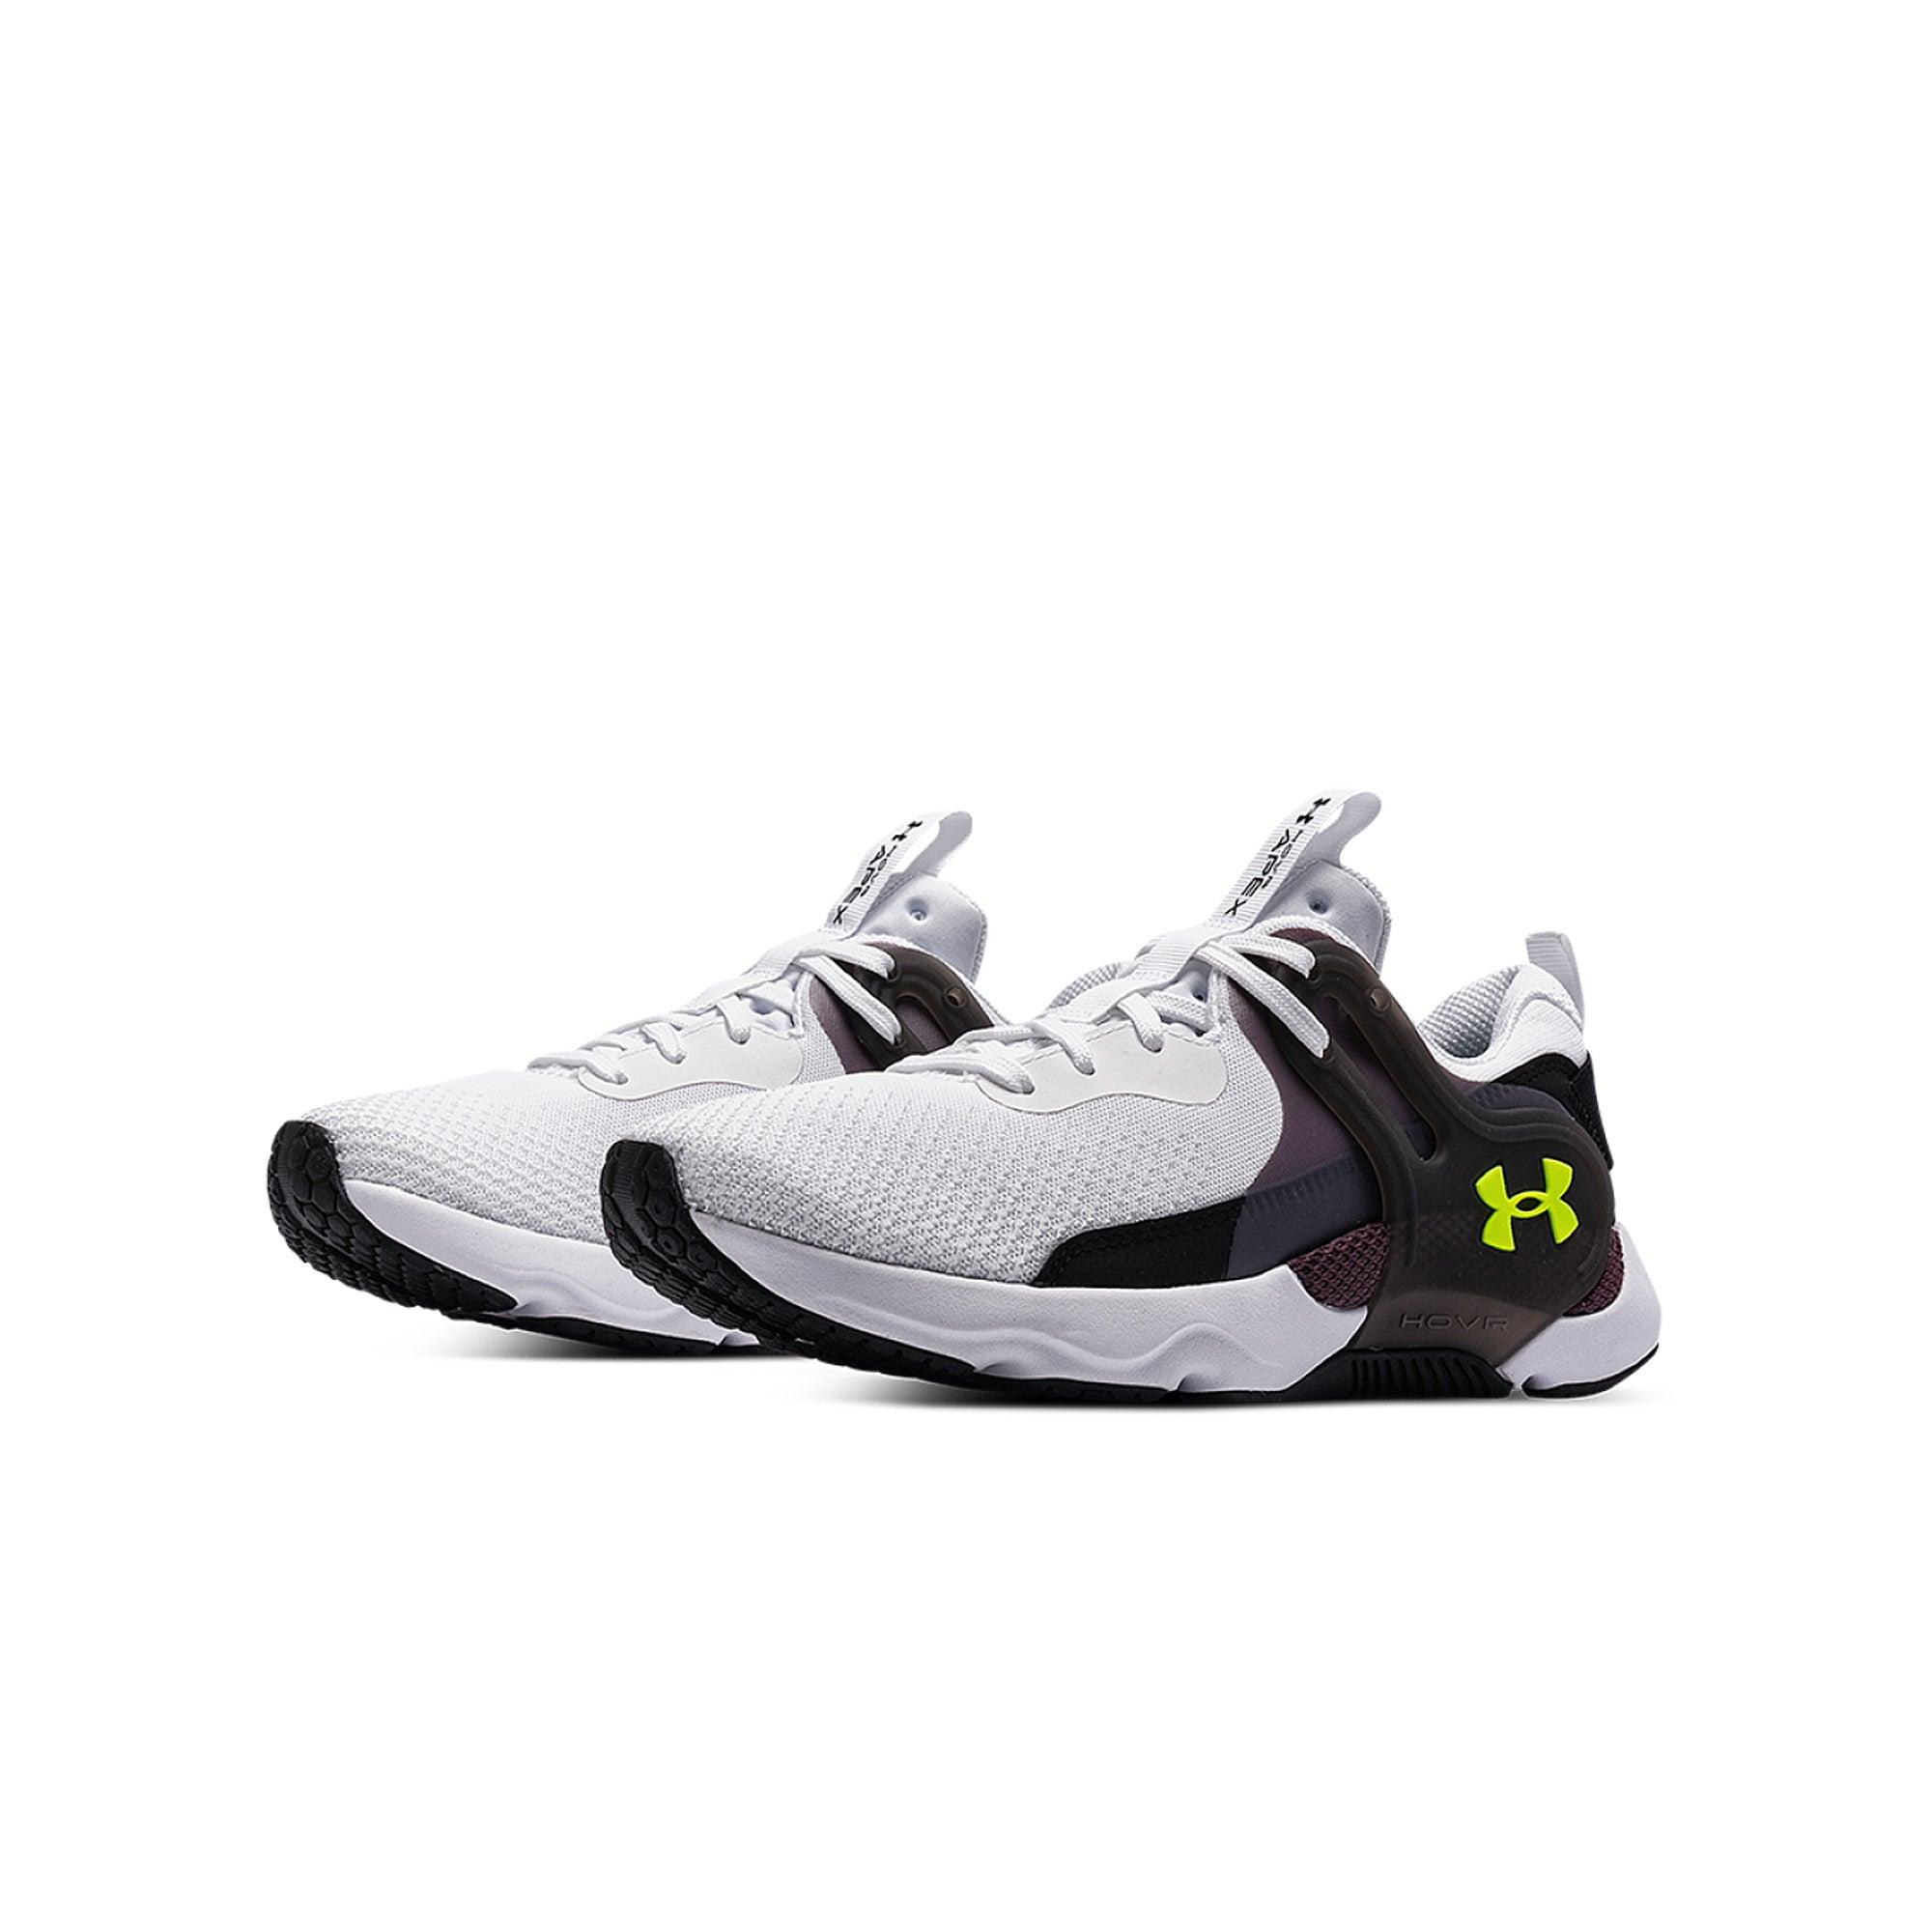 Giày thể thao nữ Under Armour HOVR Apex 3 - 3024272